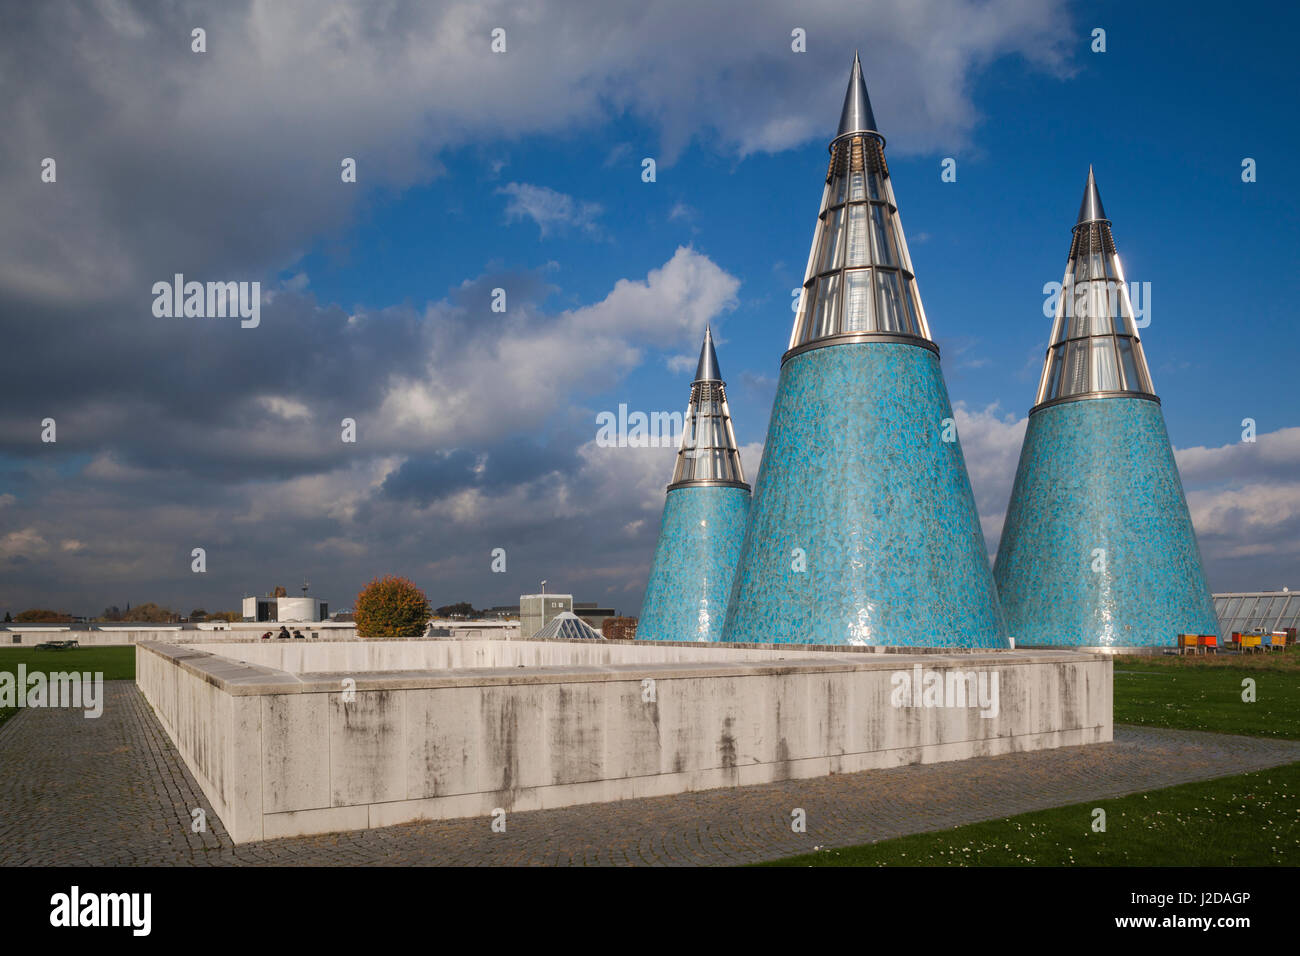 Germany, Nordrhein-Westfalen, Bonn, Museumsmeile, Bundeskunsthalle, museum of technology and art, rooftop towers Stock Photo